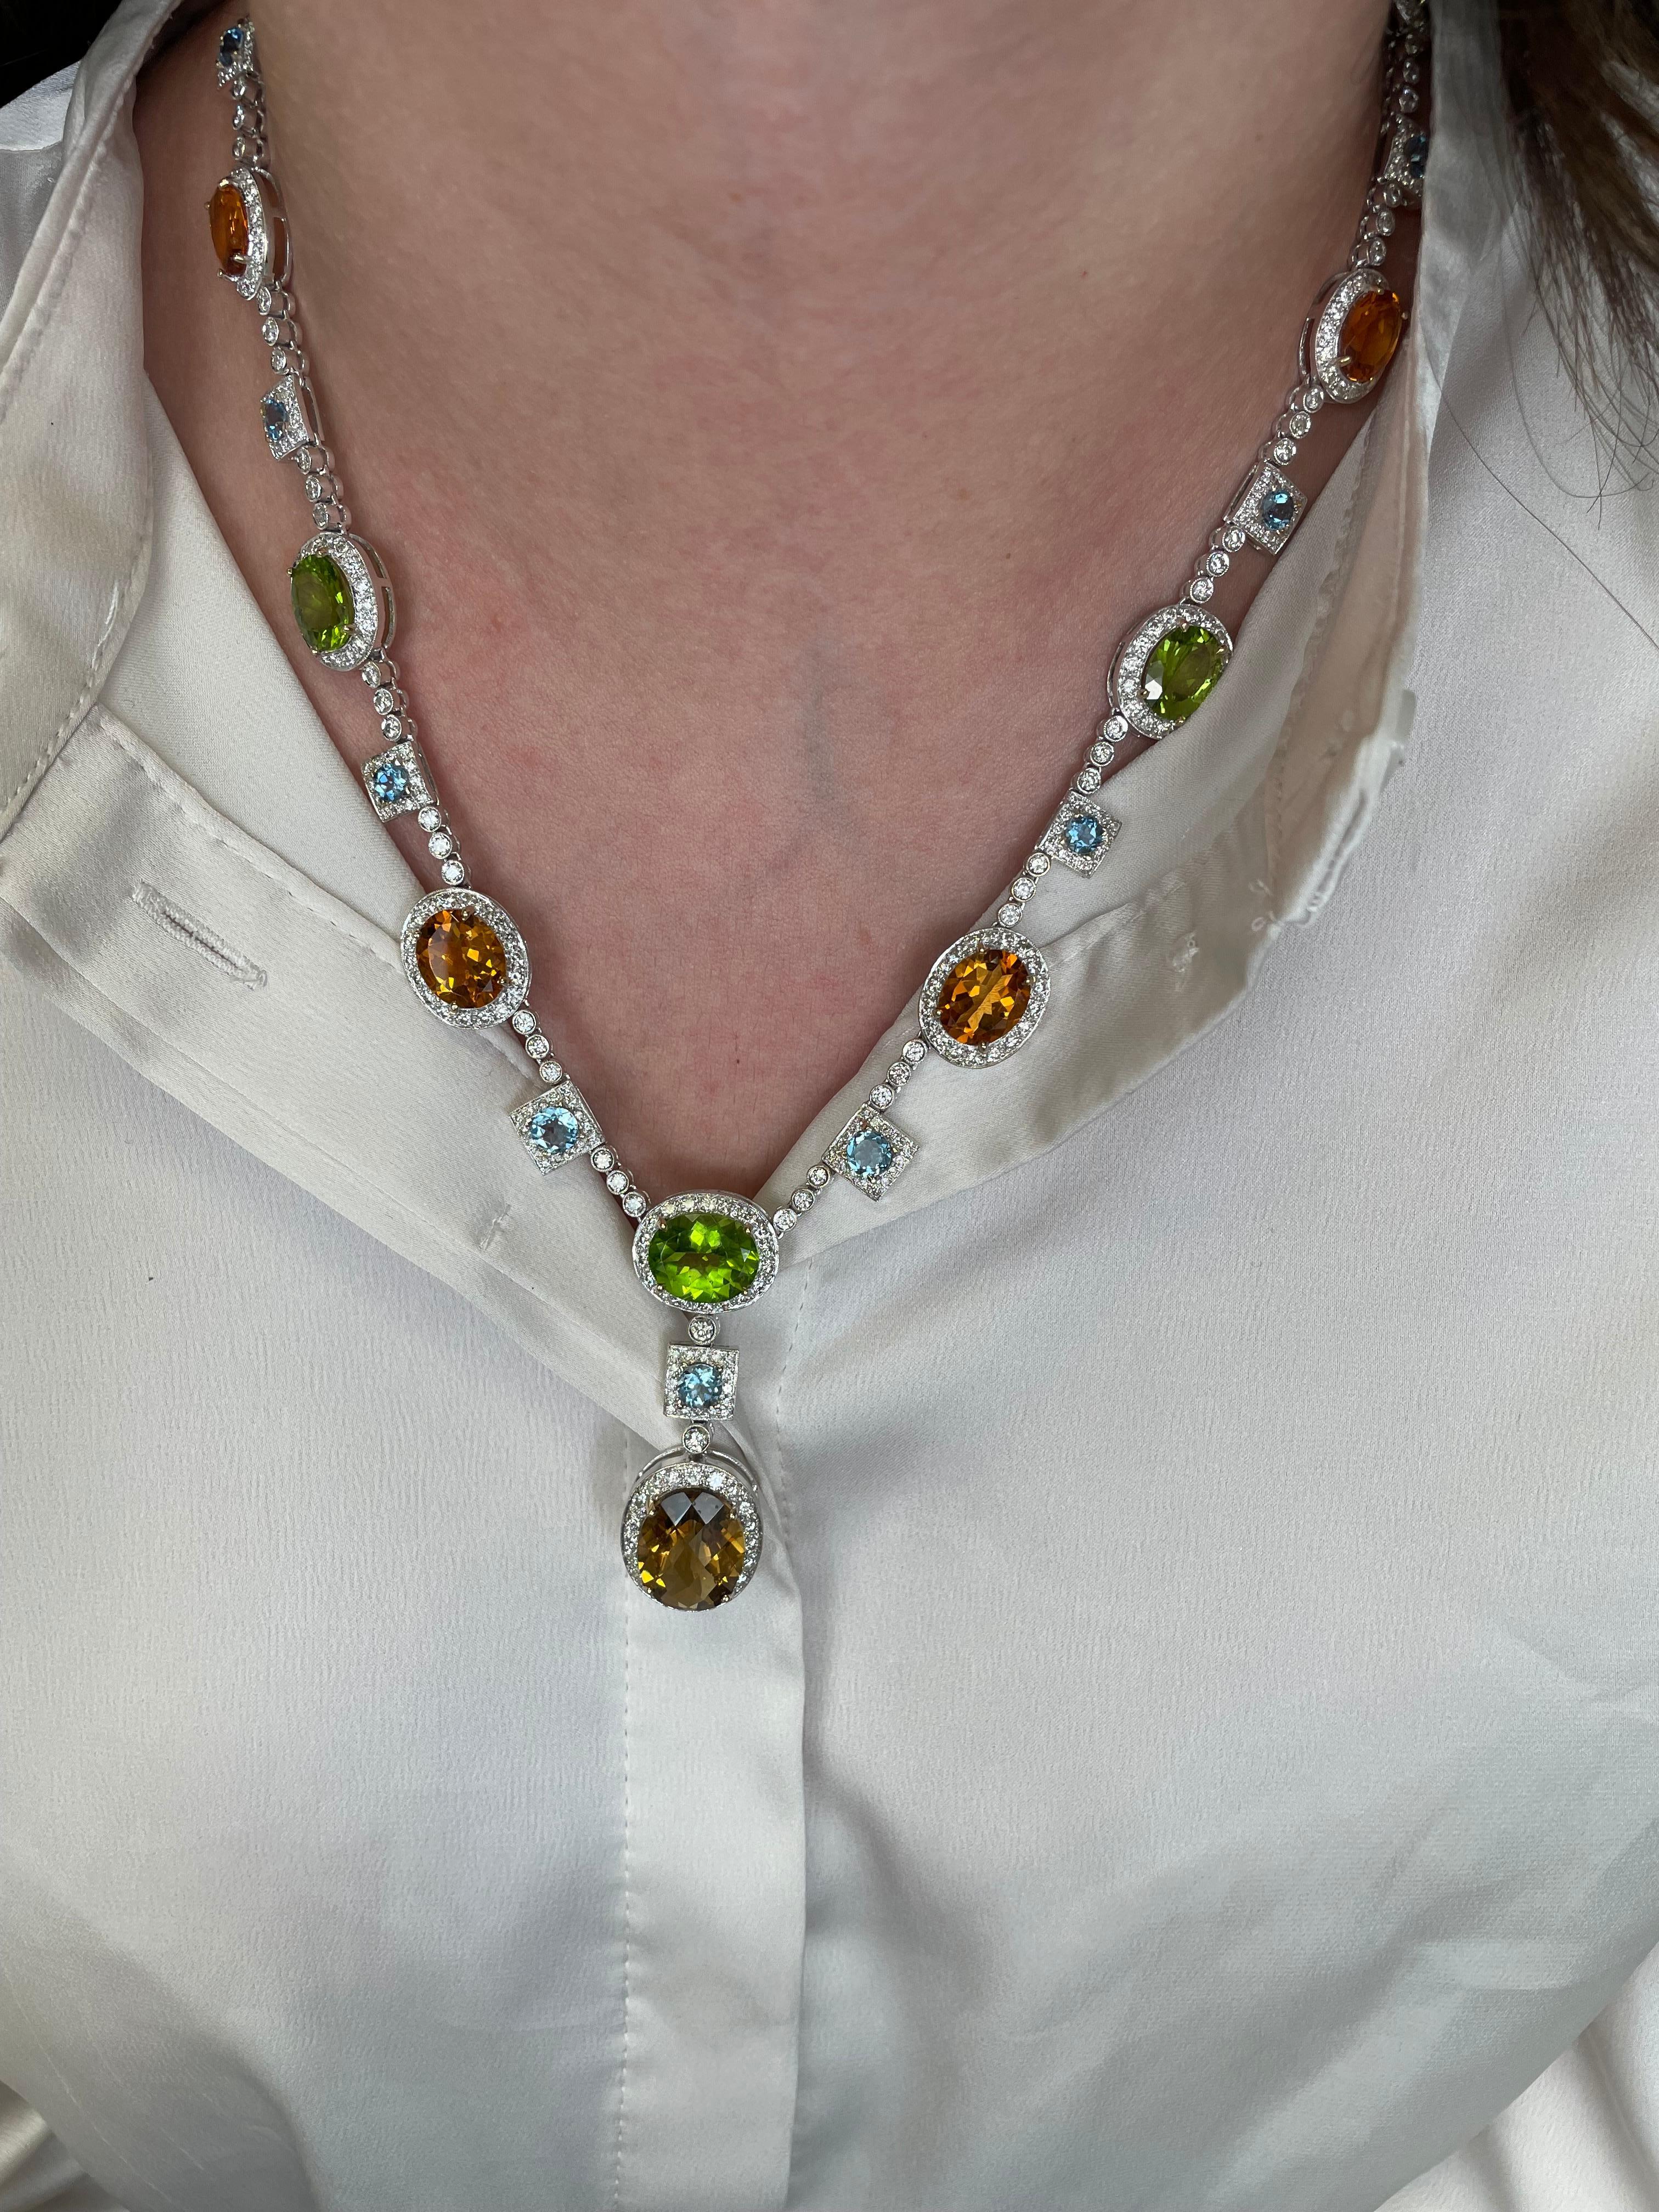 Statement multi colored stone and diamond drop necklace.
10.10 carats of round brilliant diamonds, approximately H/I color and SI clarity. 15.66 carats of oval peridot. 18.79 carats of oval citrine quartz. 5.85 carats of round aquamarine beryl.